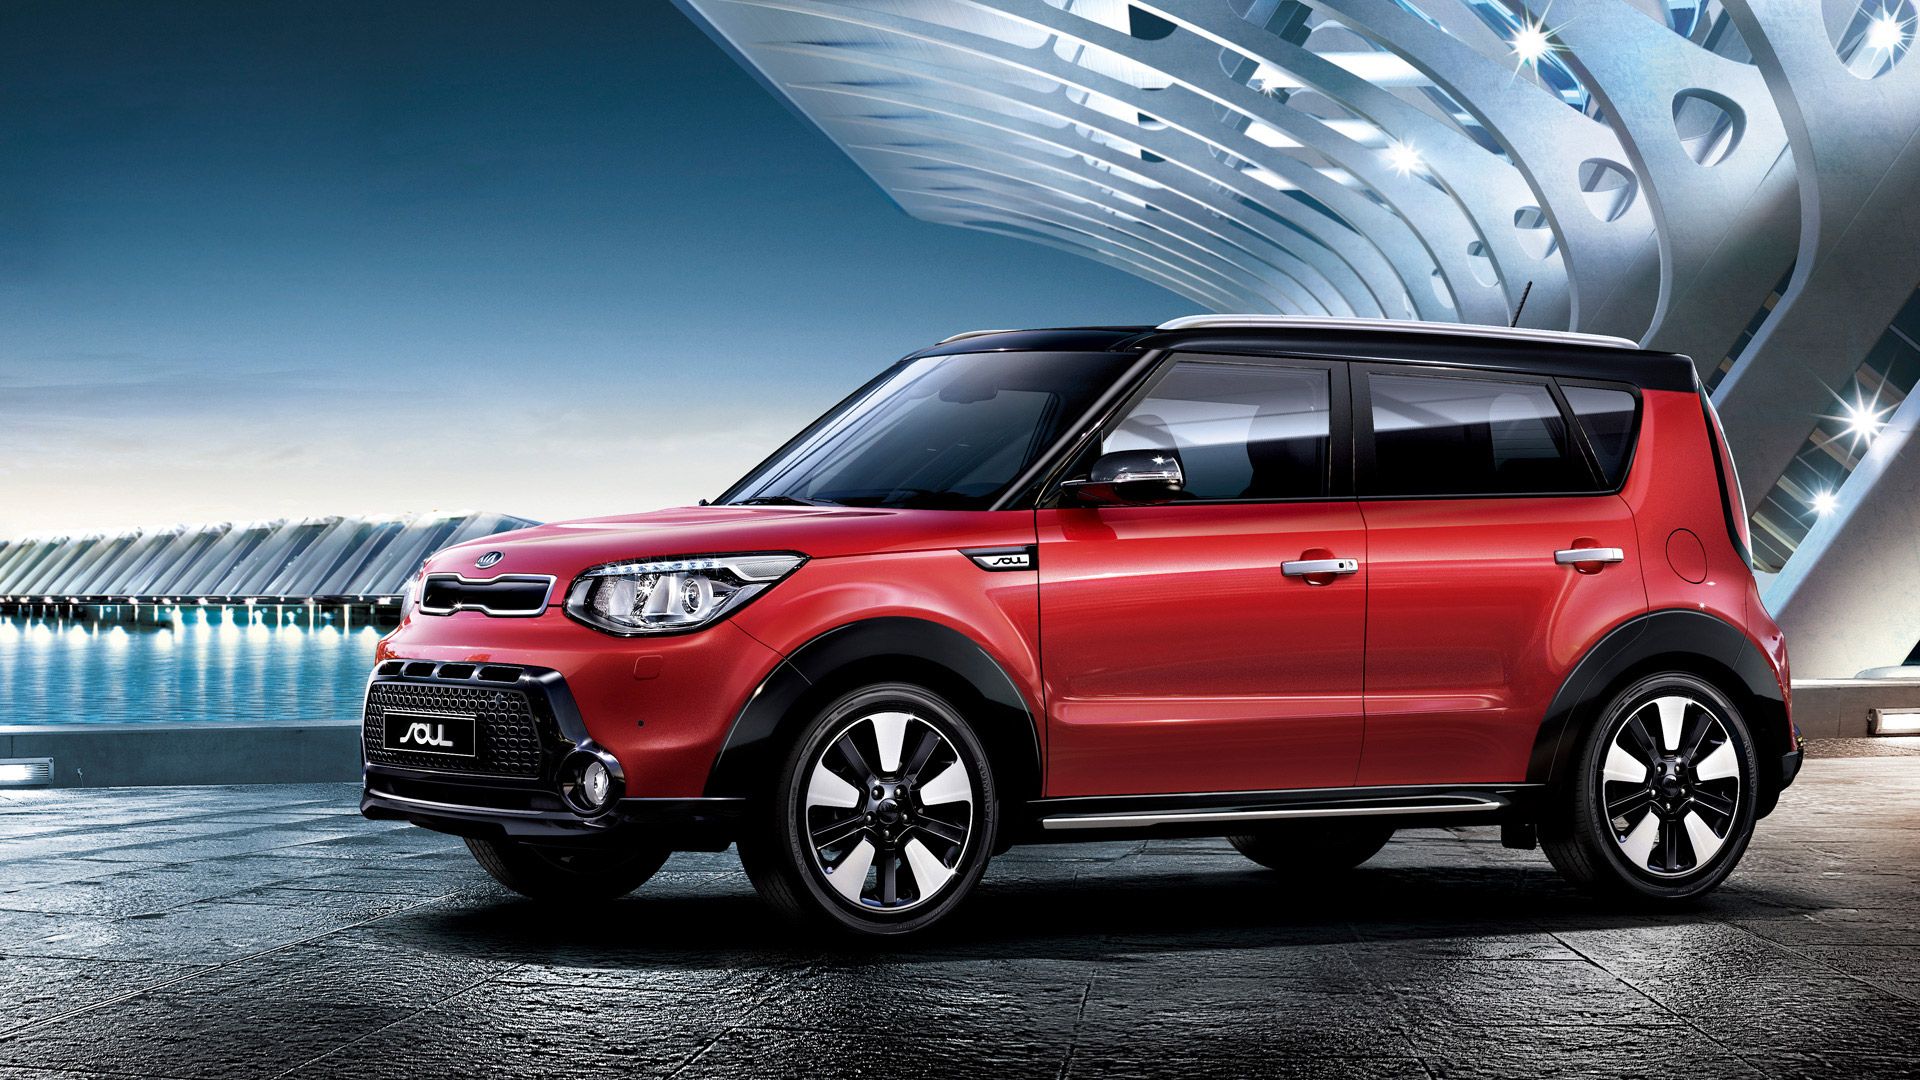 Kia Soul Wallpaper And Background Image